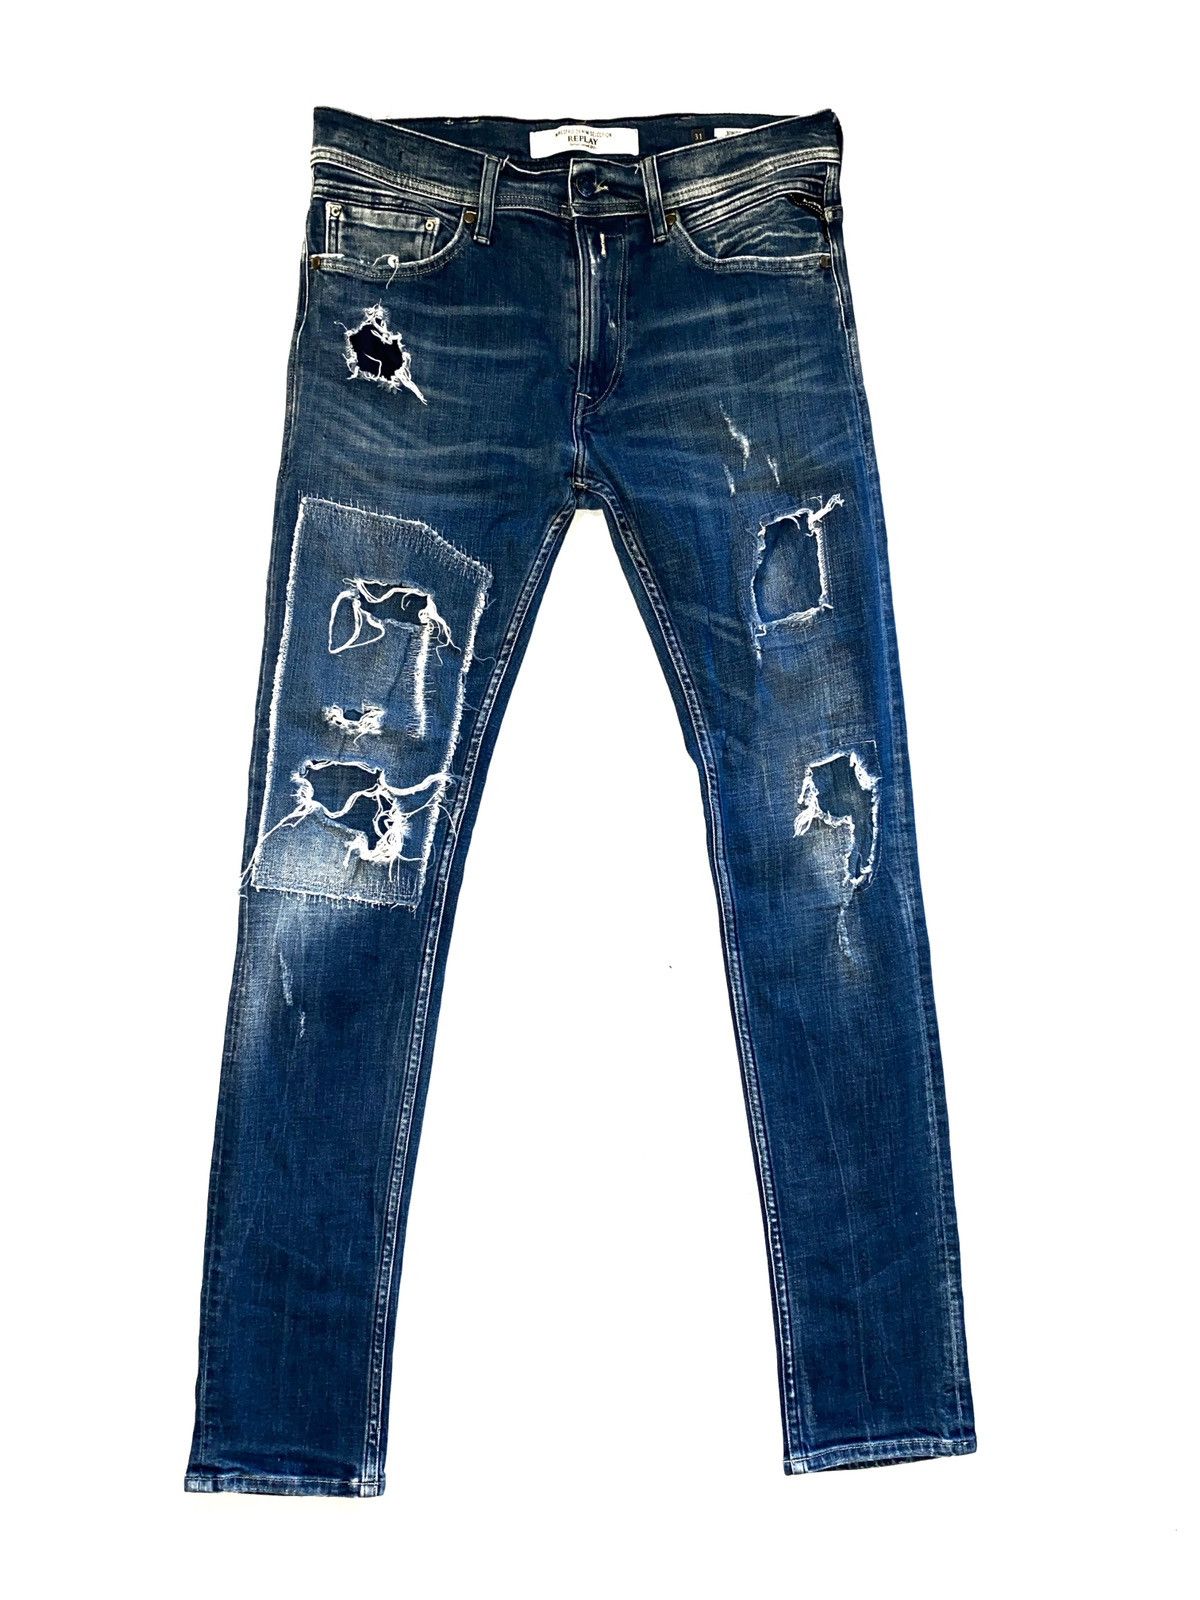 Replay REPLAY MAESTRO DENIM SELECTION MEN'S RIPPED JEANS / SIZE 31 ...